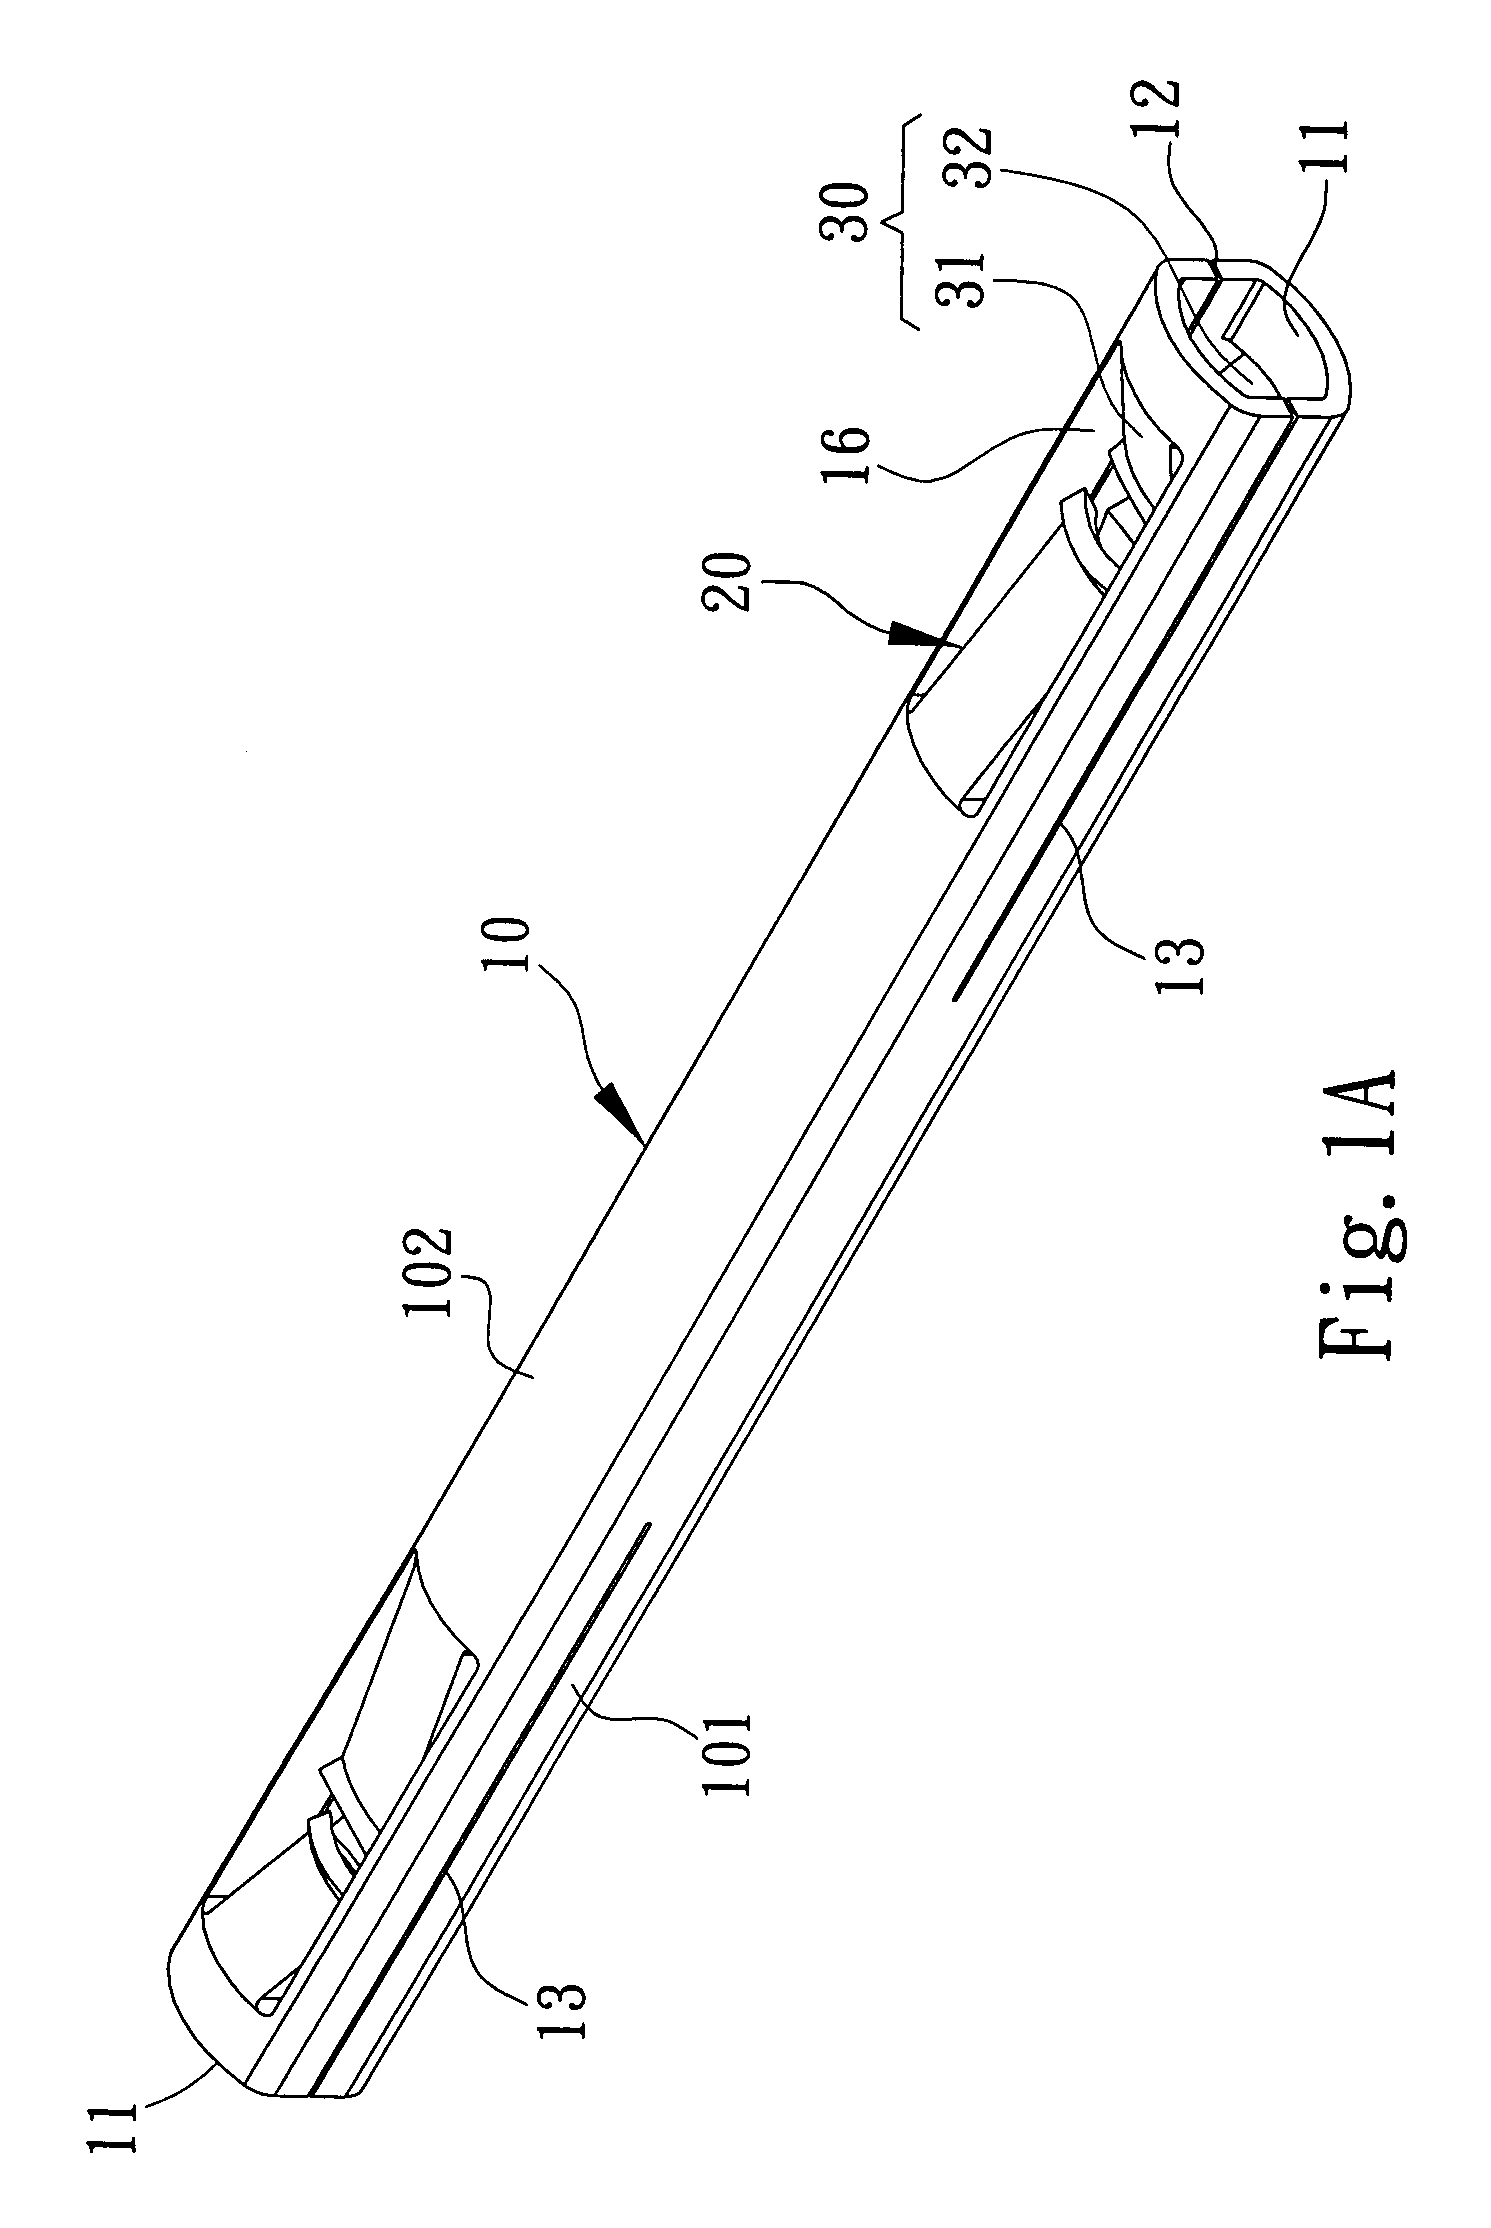 Central conductor of coaxial cable connector